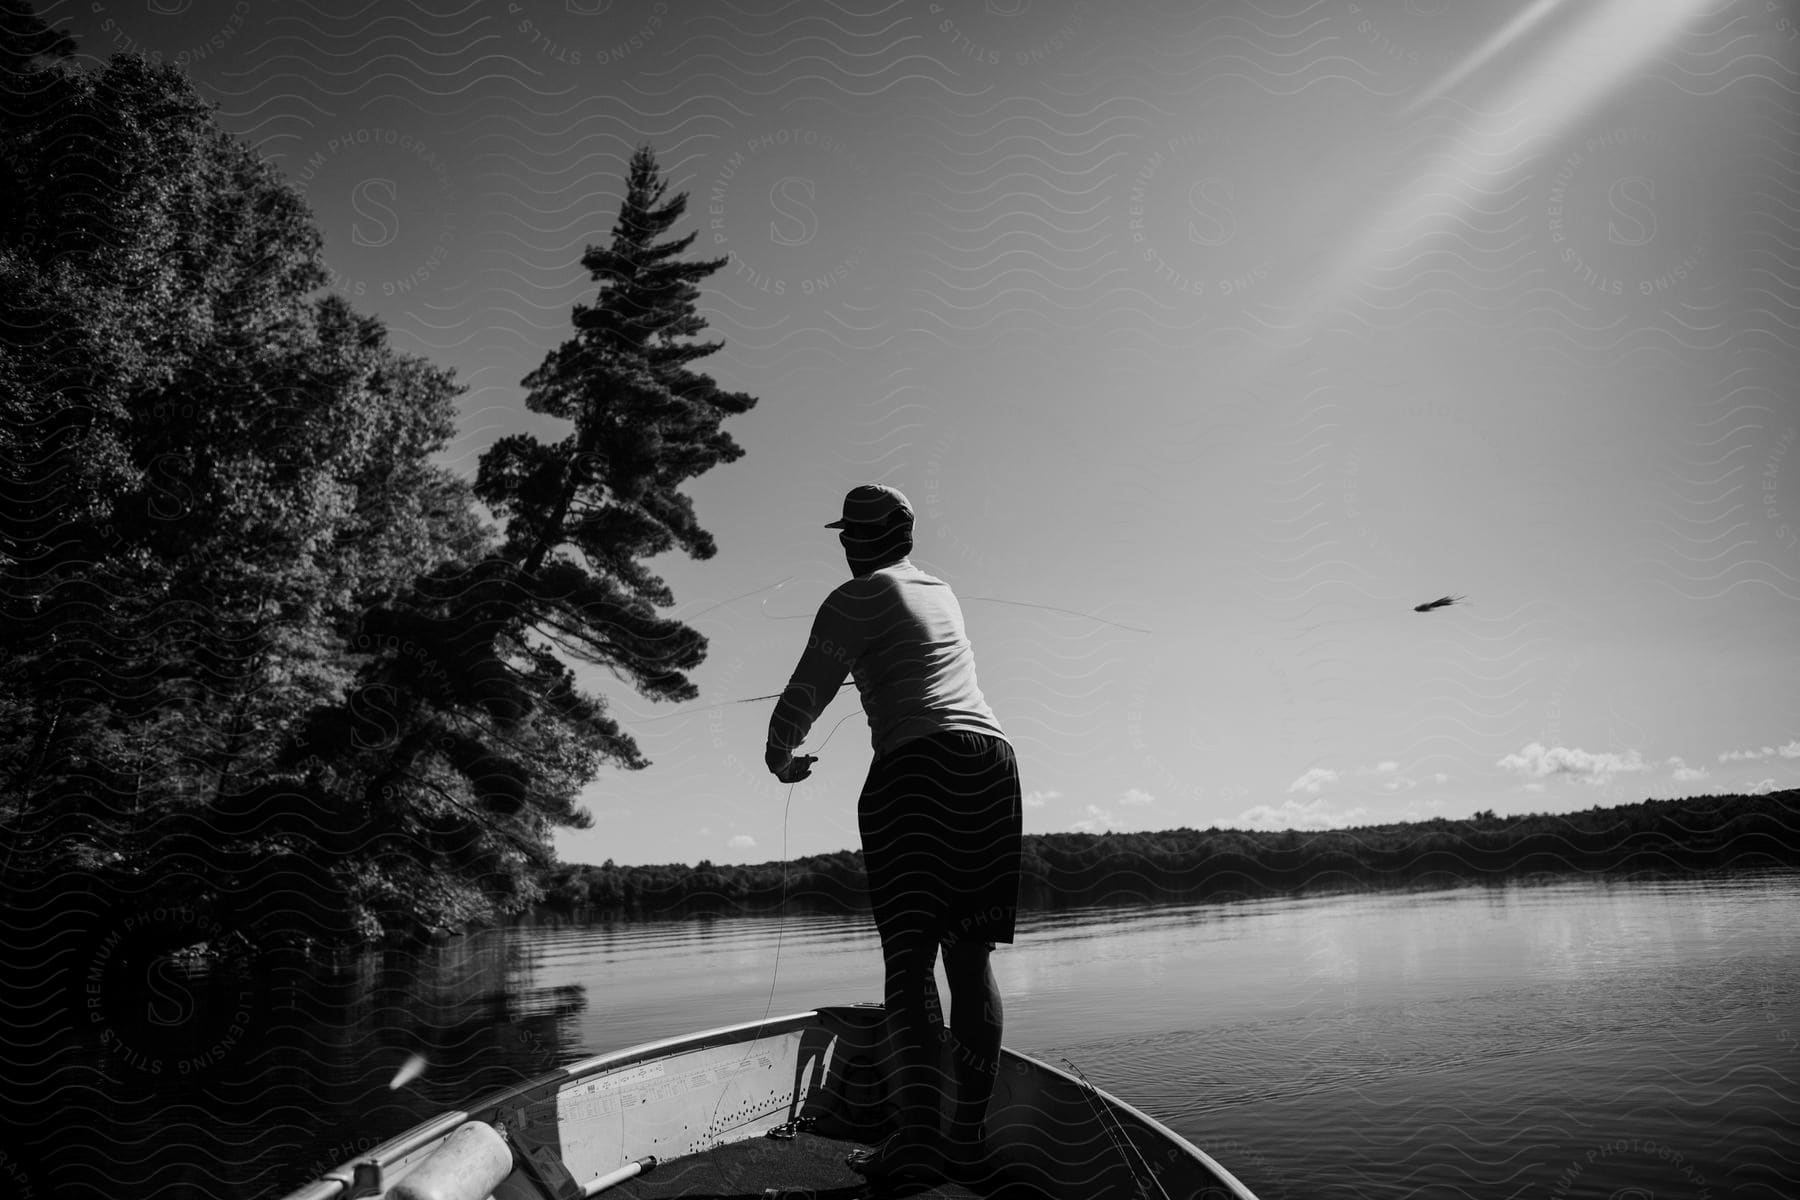 A man stands on a boat on a lake and uses a fishing rod